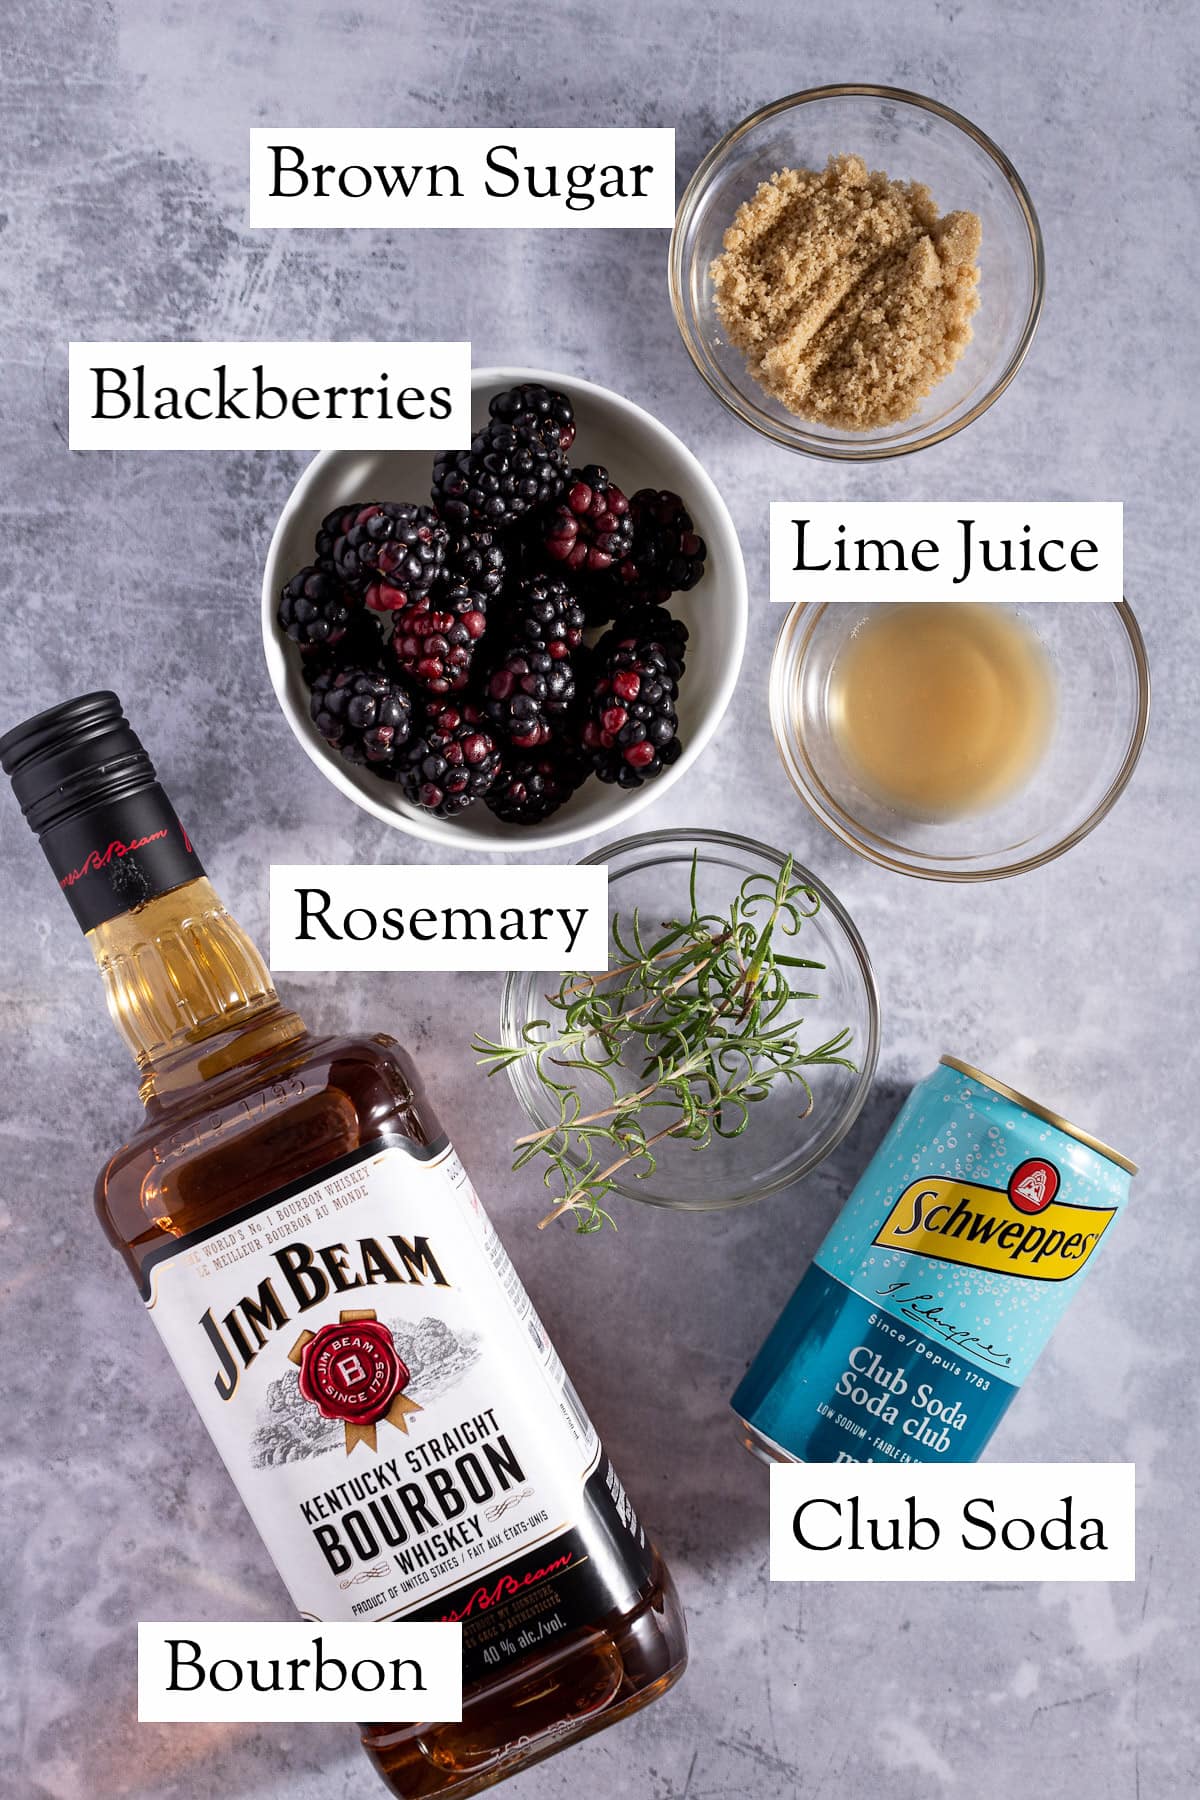 Overhead photo of the ingredients needed for the cocktail.